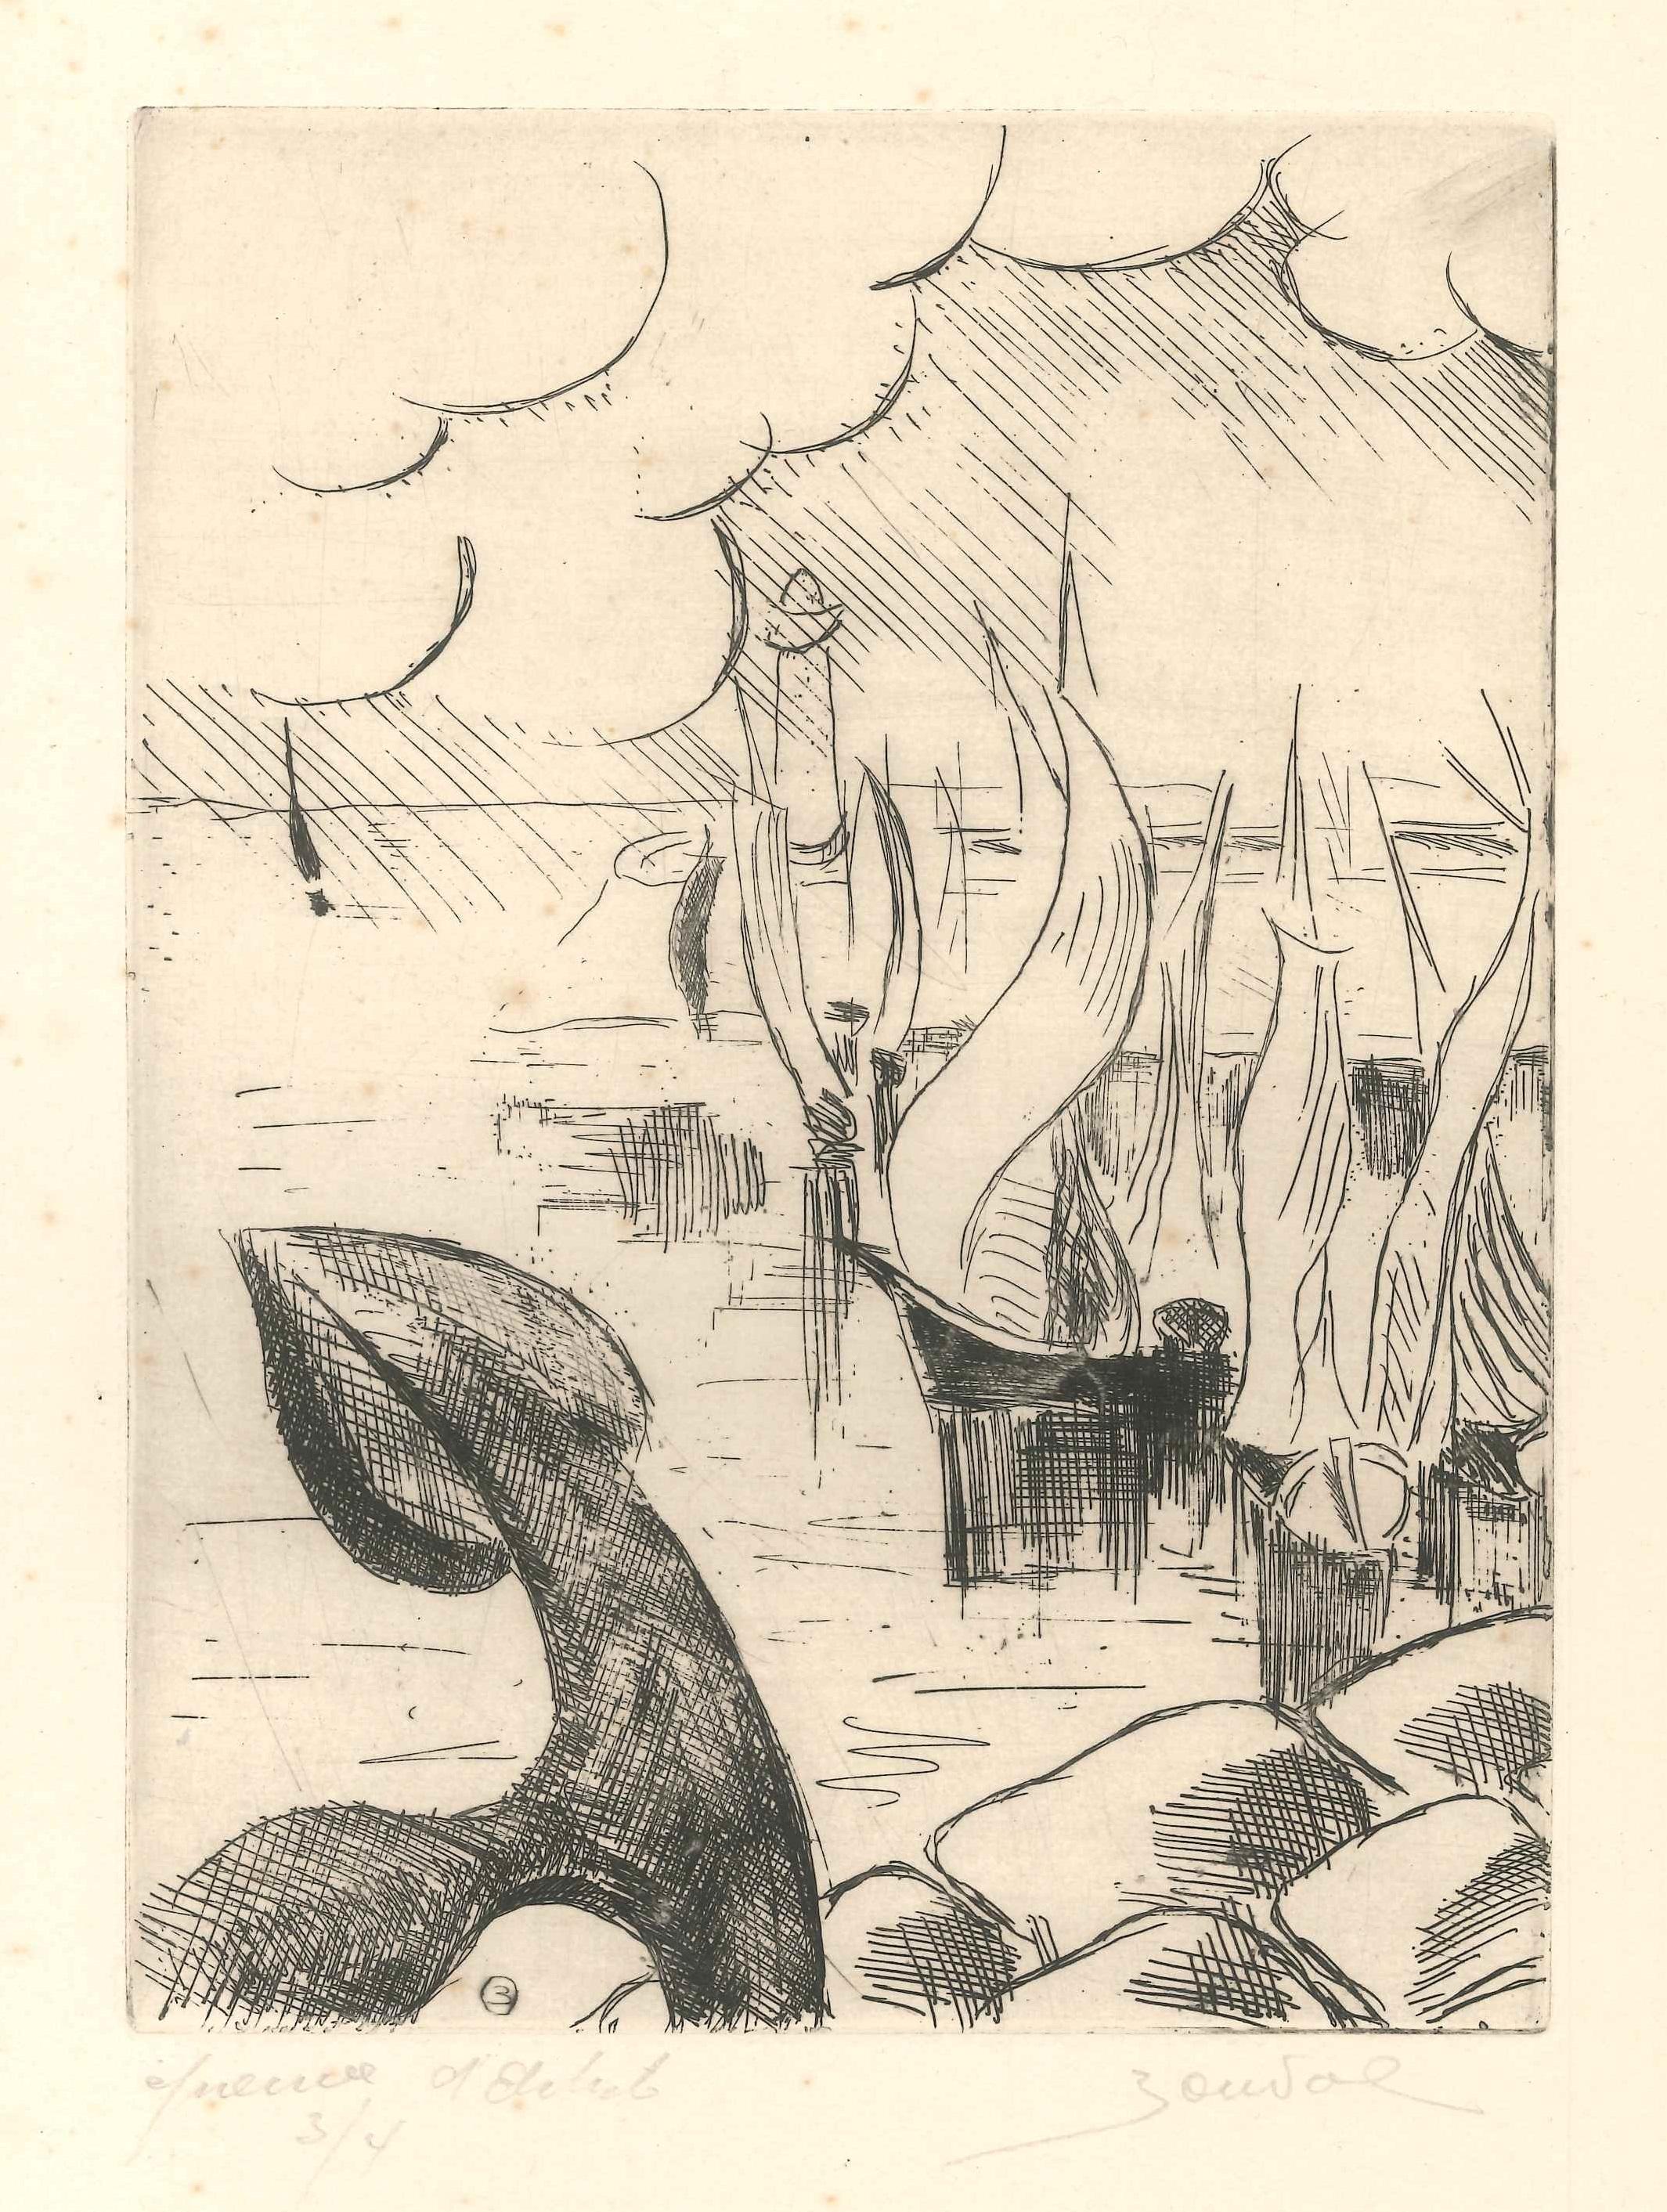 Ships is a beautiful etching realized by Jean Bondal (b. 1914).

Hand-signed and numbered in pencil on the lower margin by the artist. 

This original print representing a marine landscape with ships under a storm is a numbered artist's proof.